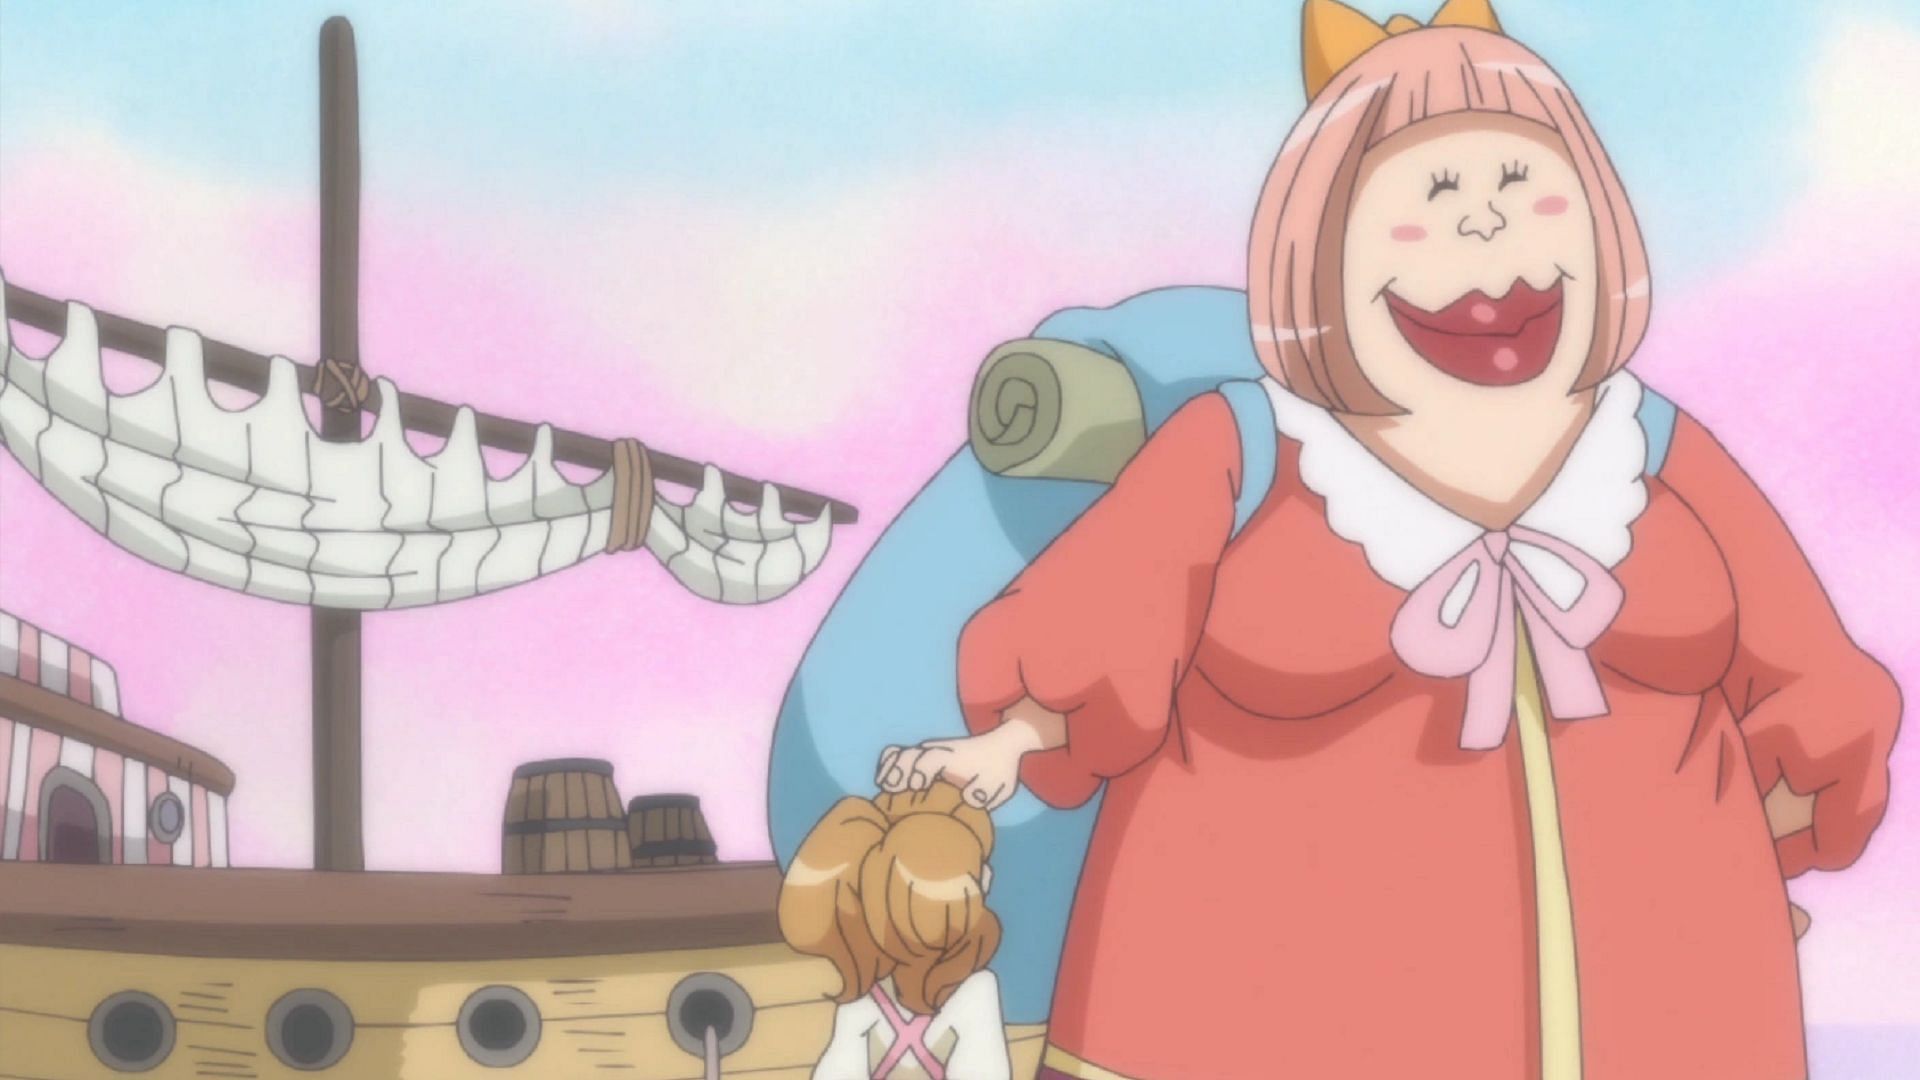 Charlotte Lola as seen in One Piece (Image via Toei Animation)